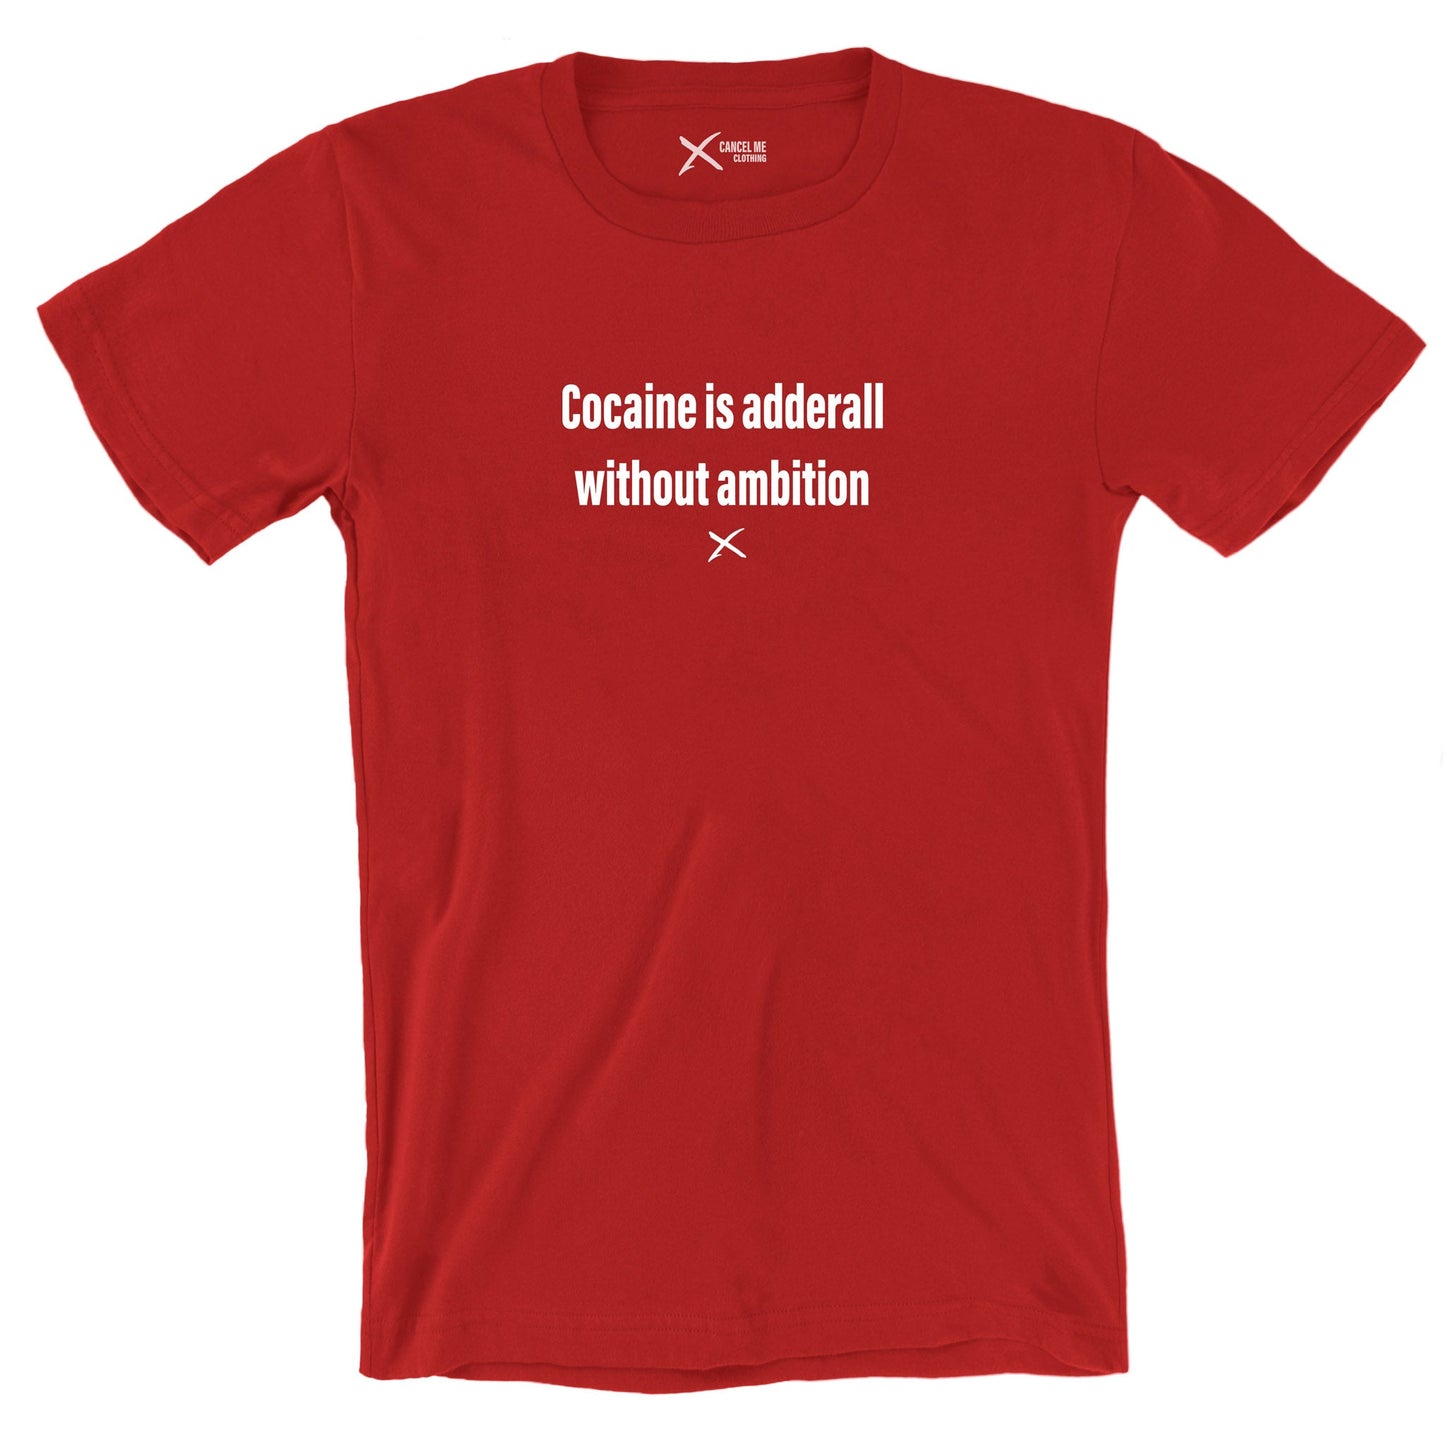 Cocaine is adderall without ambition - Shirt